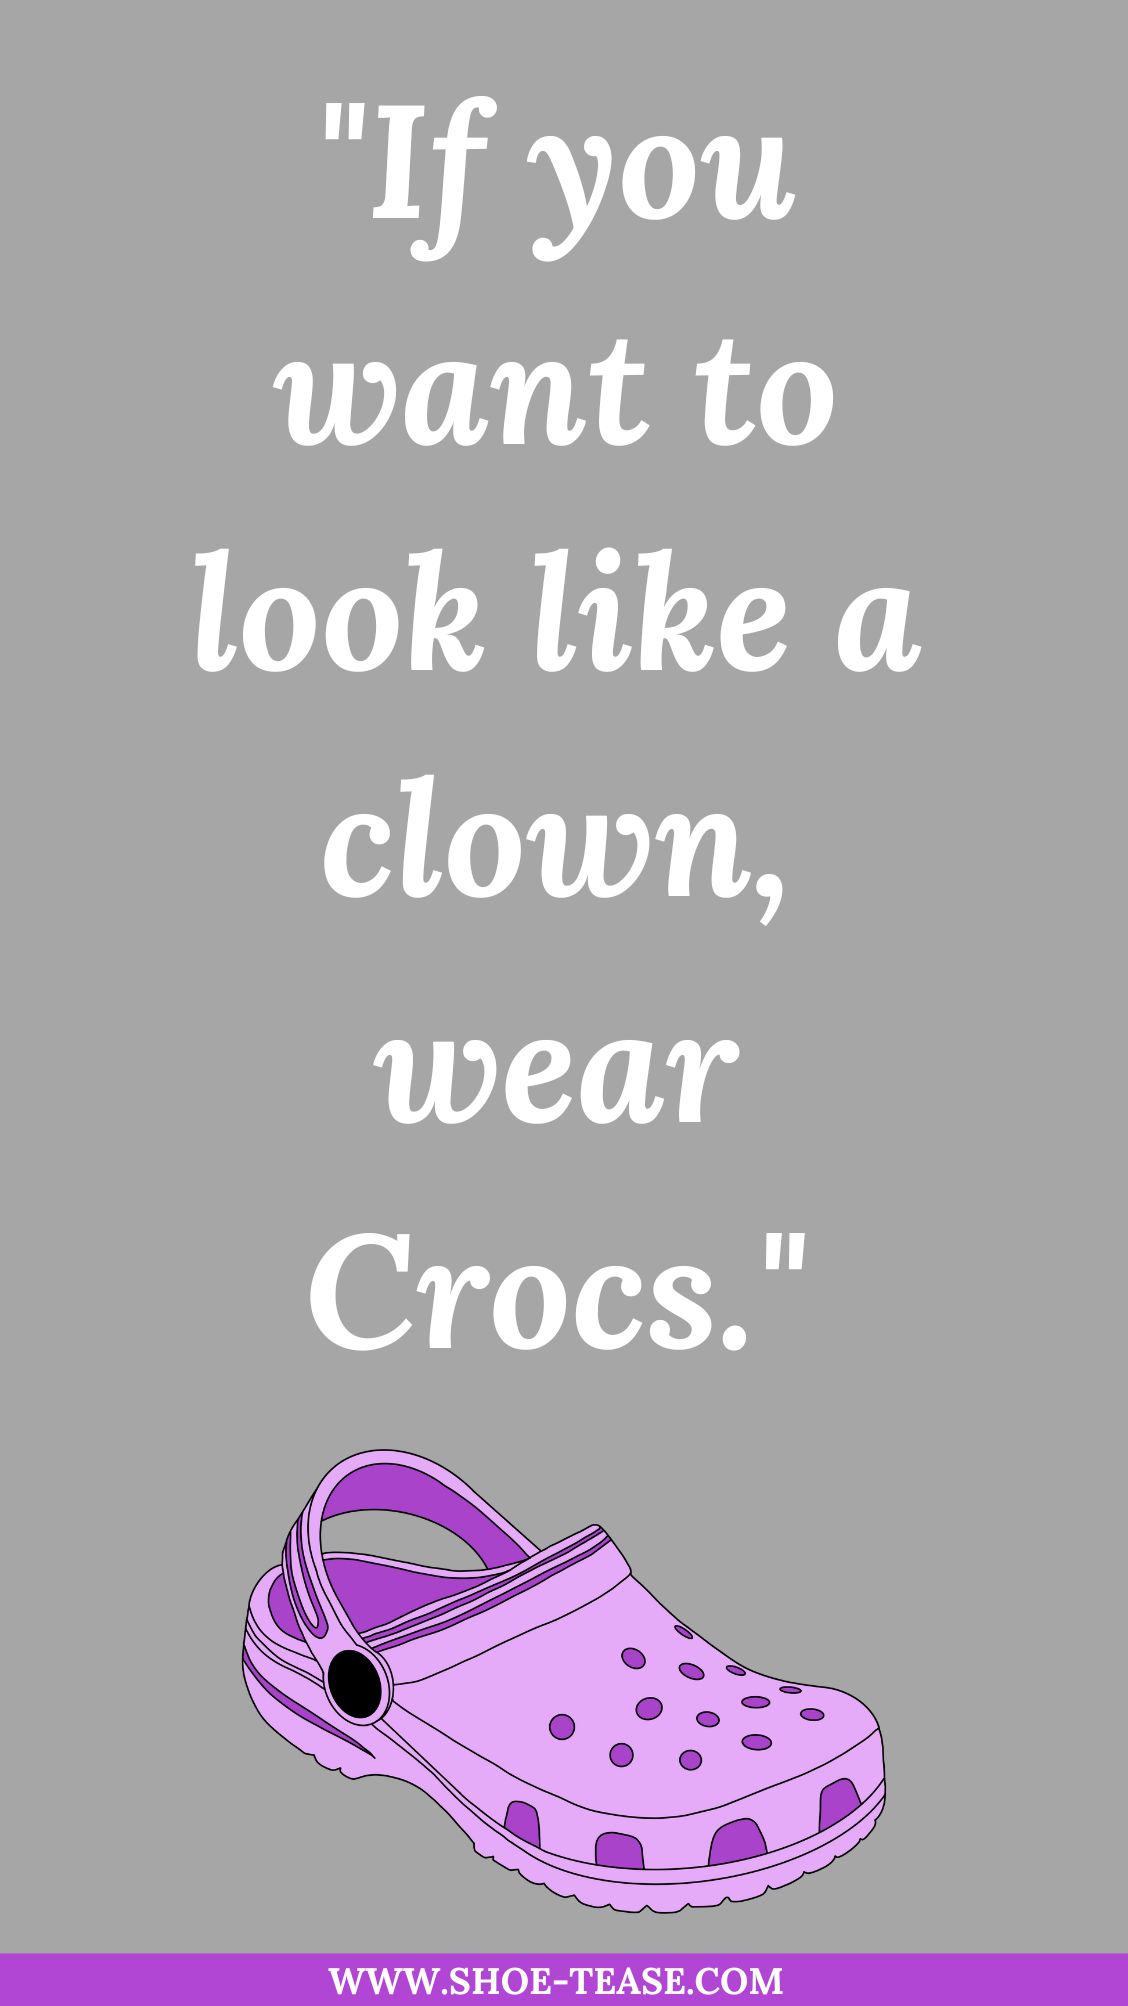 Crocs quotes reading if you want to look like a clown wear Crocs.